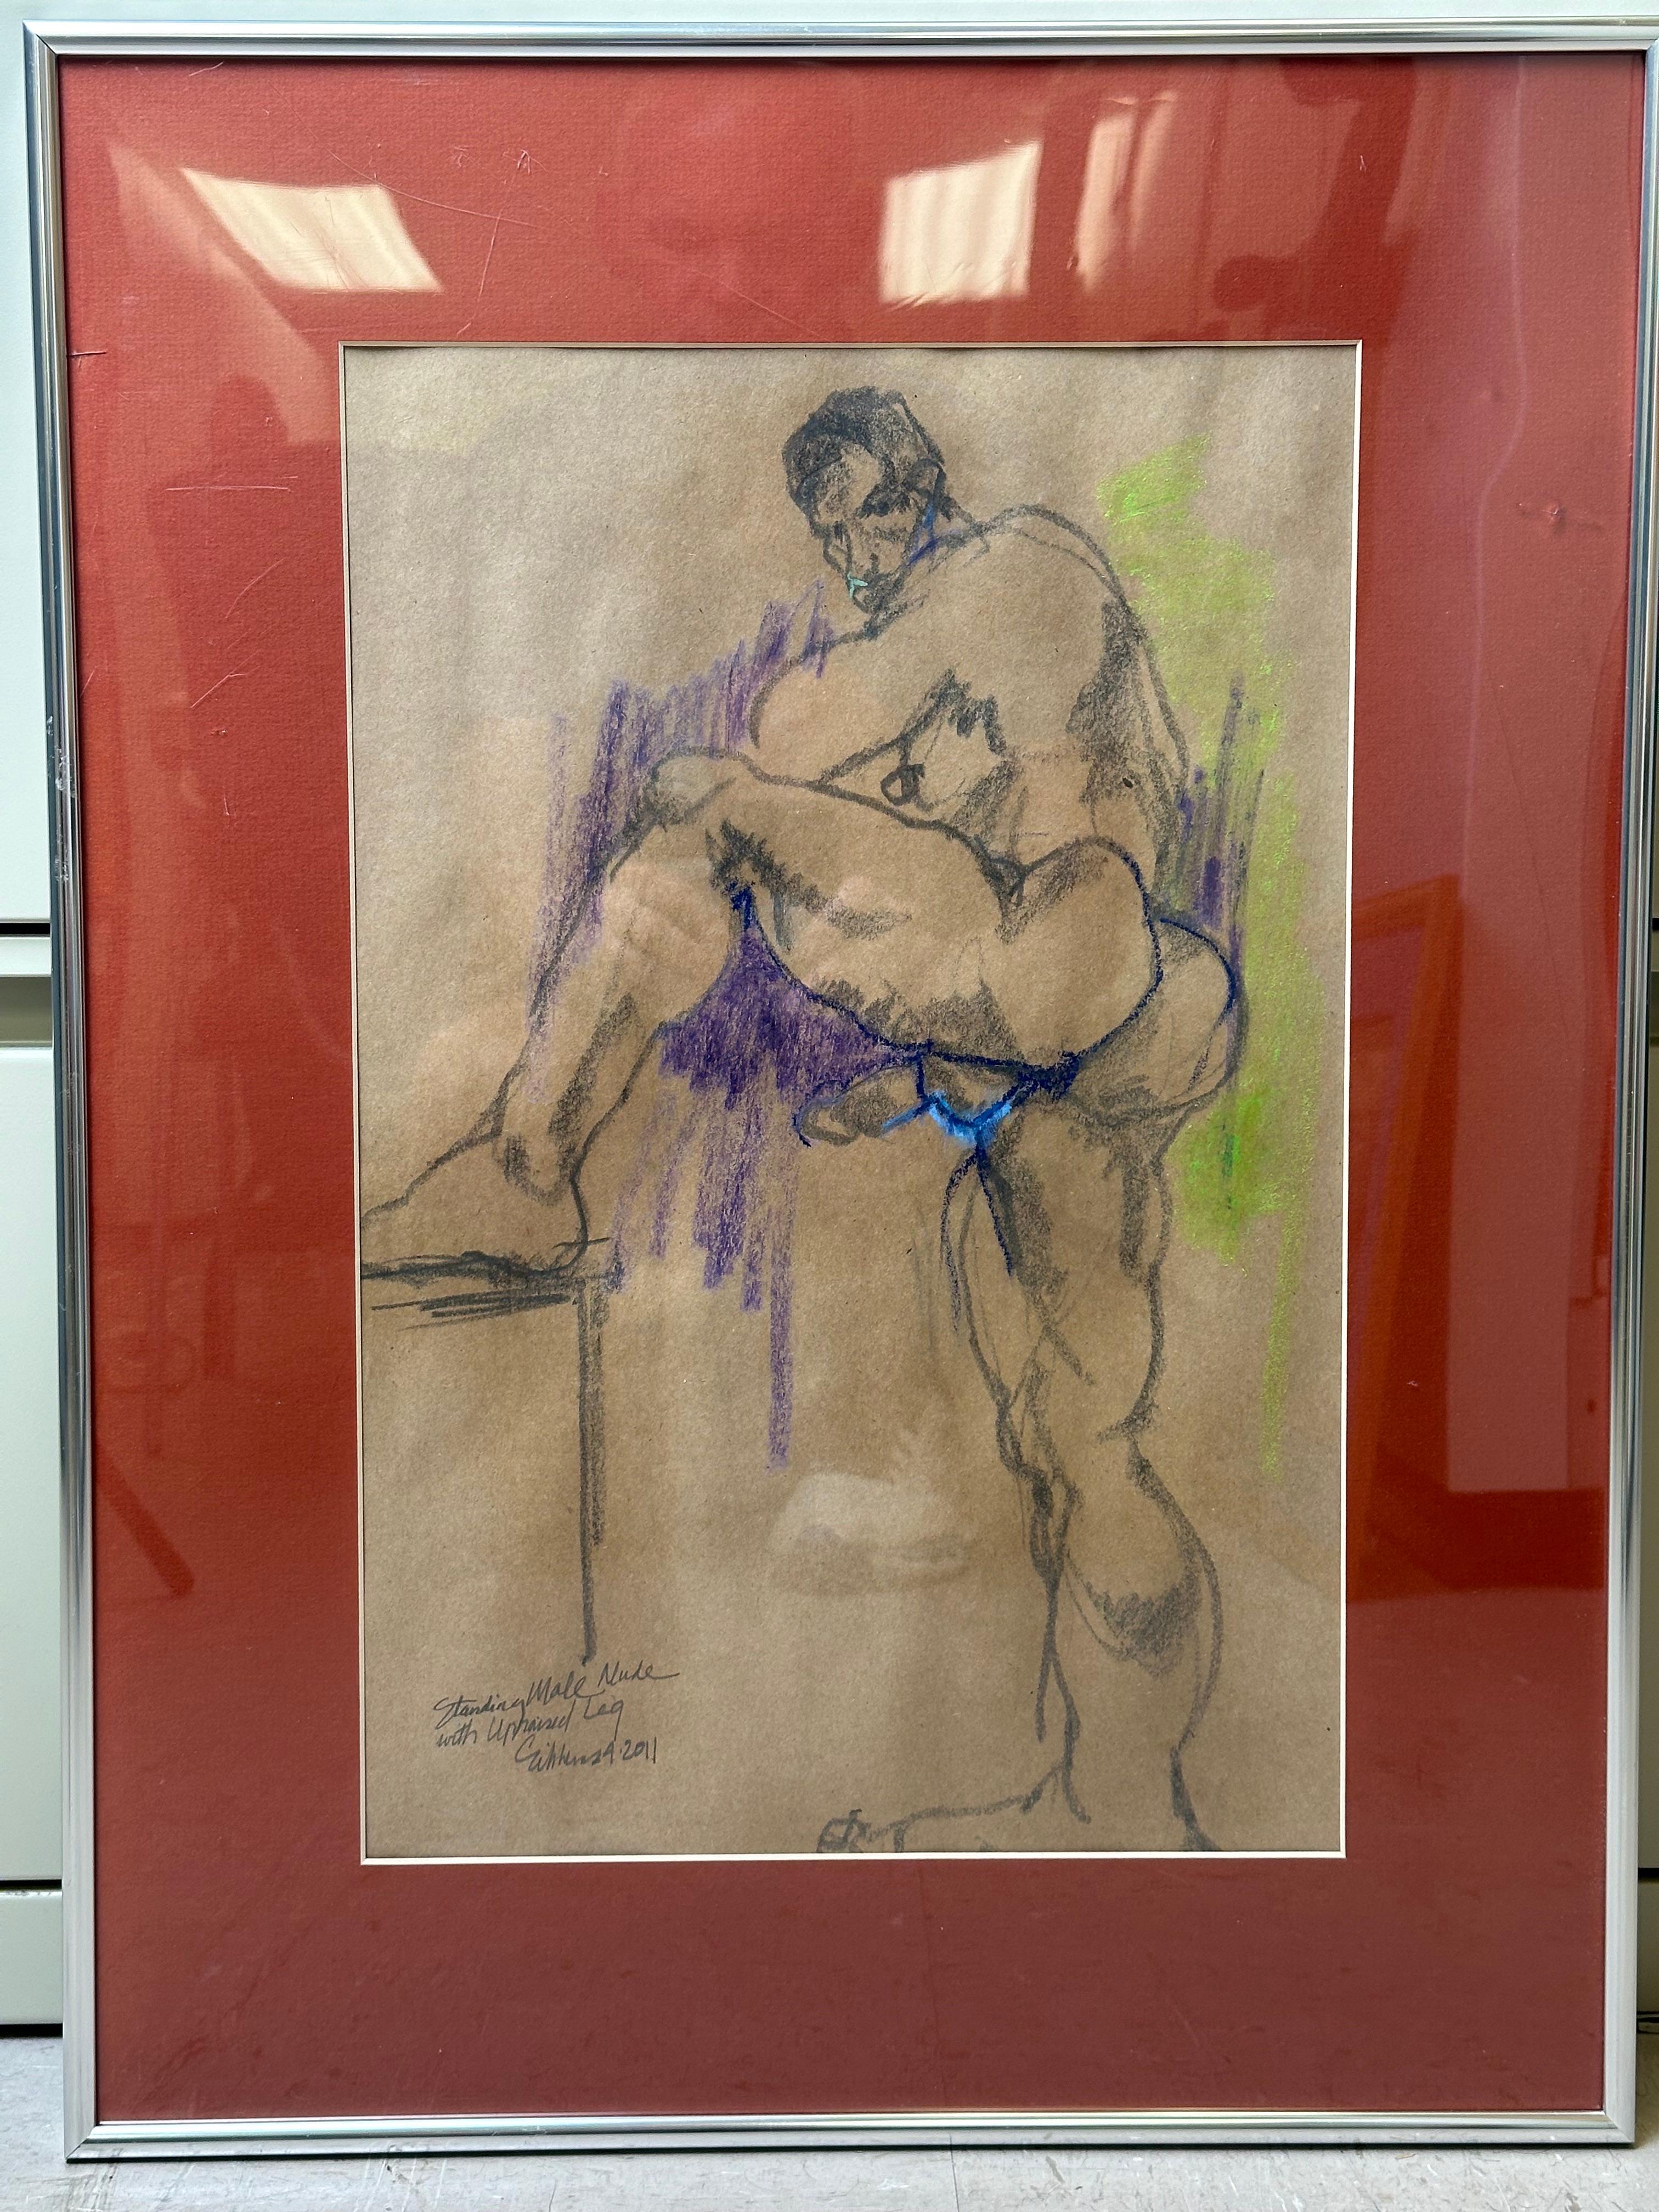 Erotic Male Nude  - Art by William Sibberns